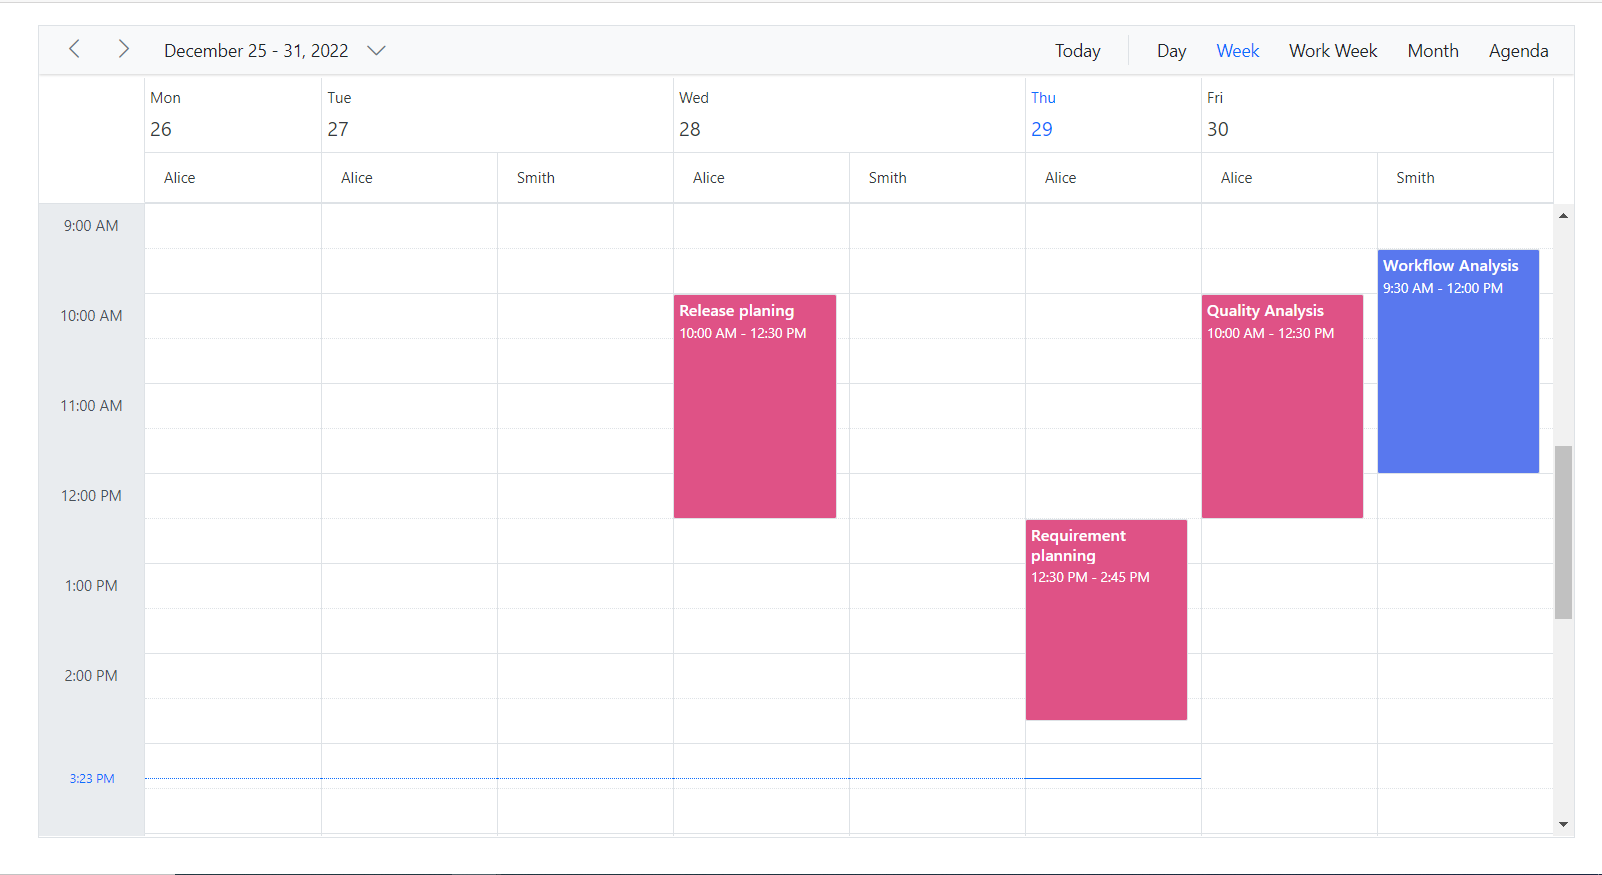 Hide non-working days when grouped by date